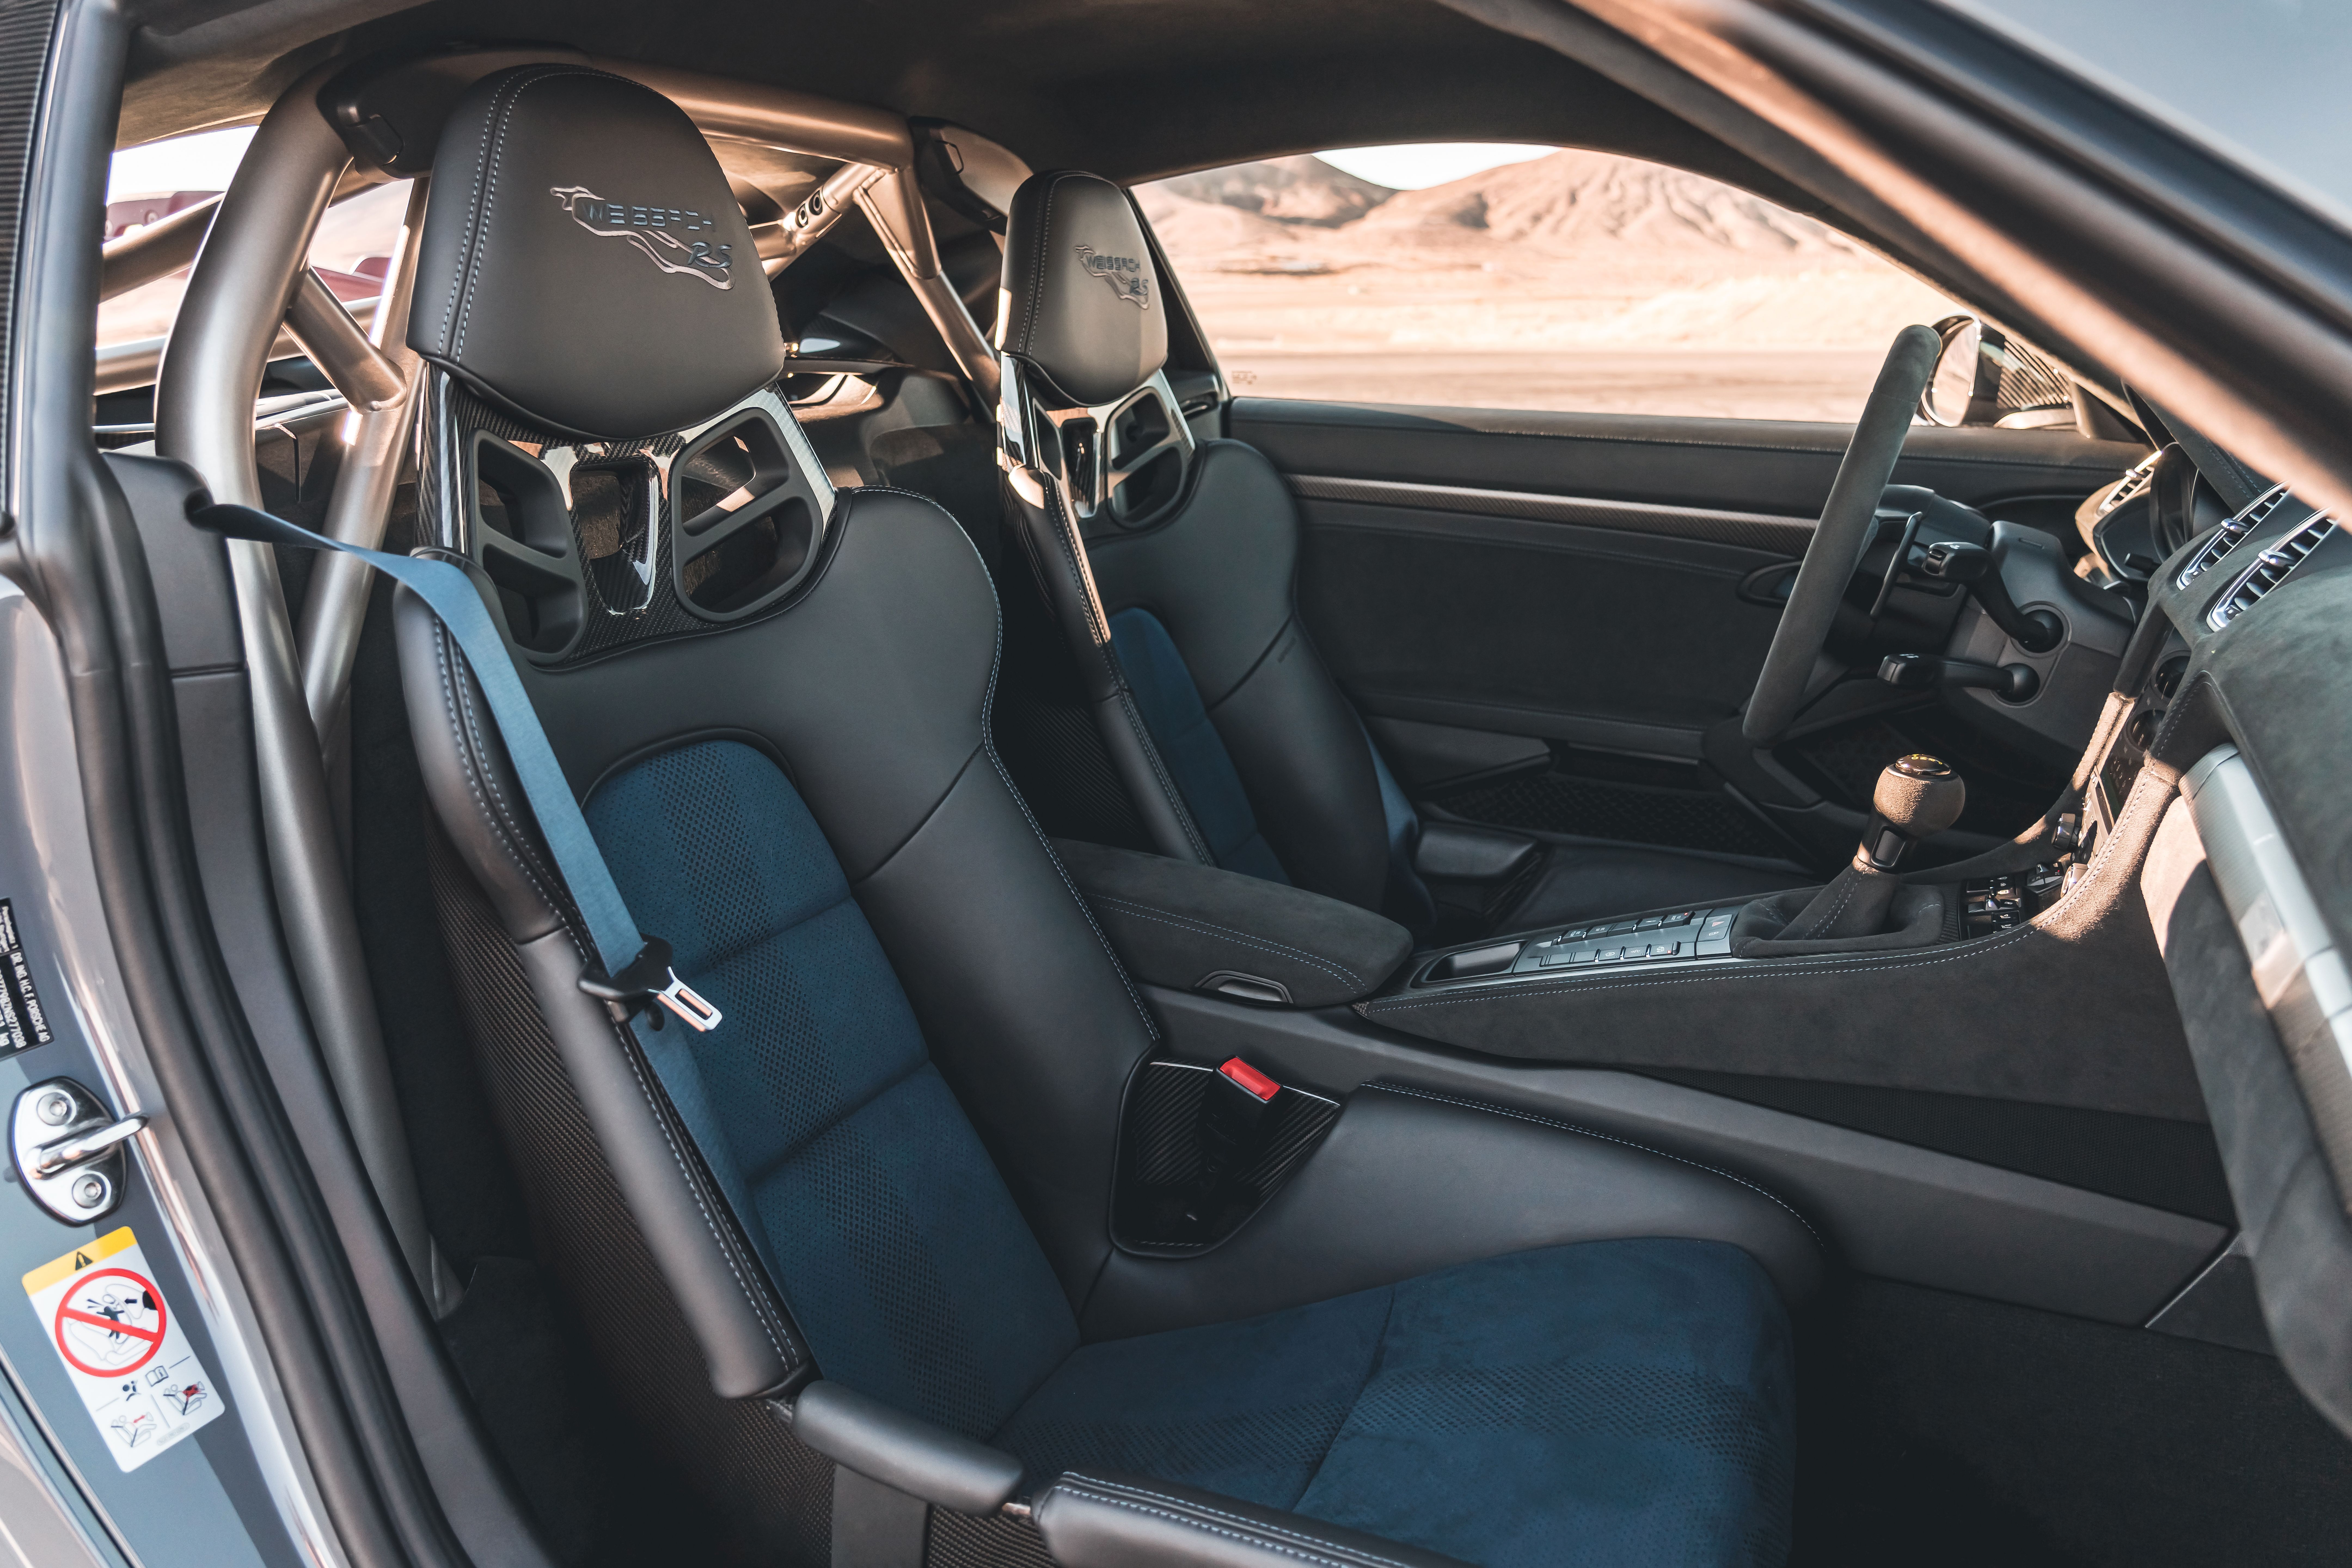 The seating inside the Porsche Cayman GT4 RS.